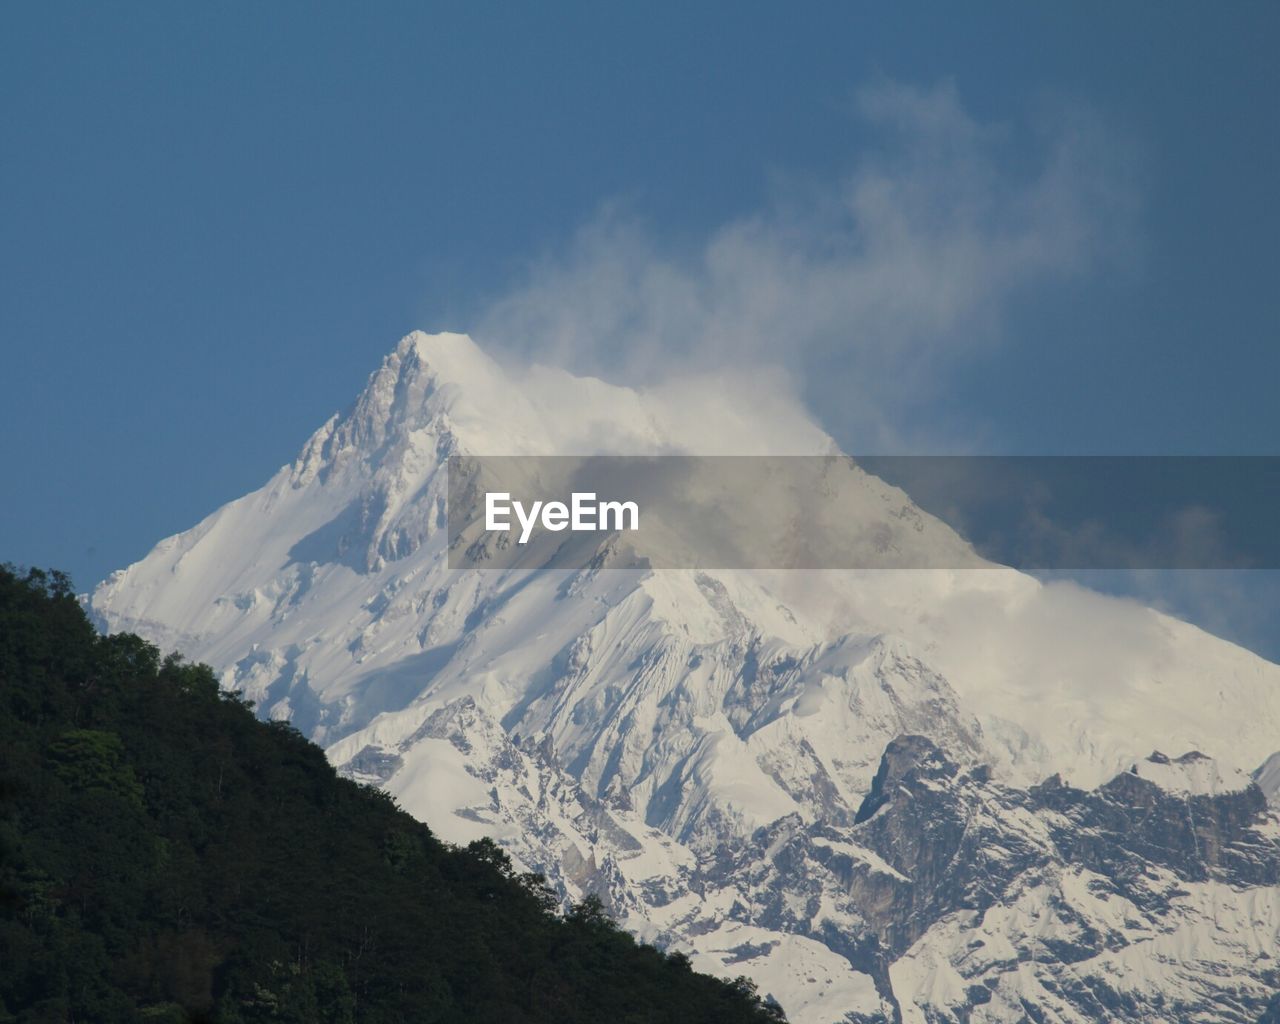 Scenic view of snowcapped mountain against clear blue sky